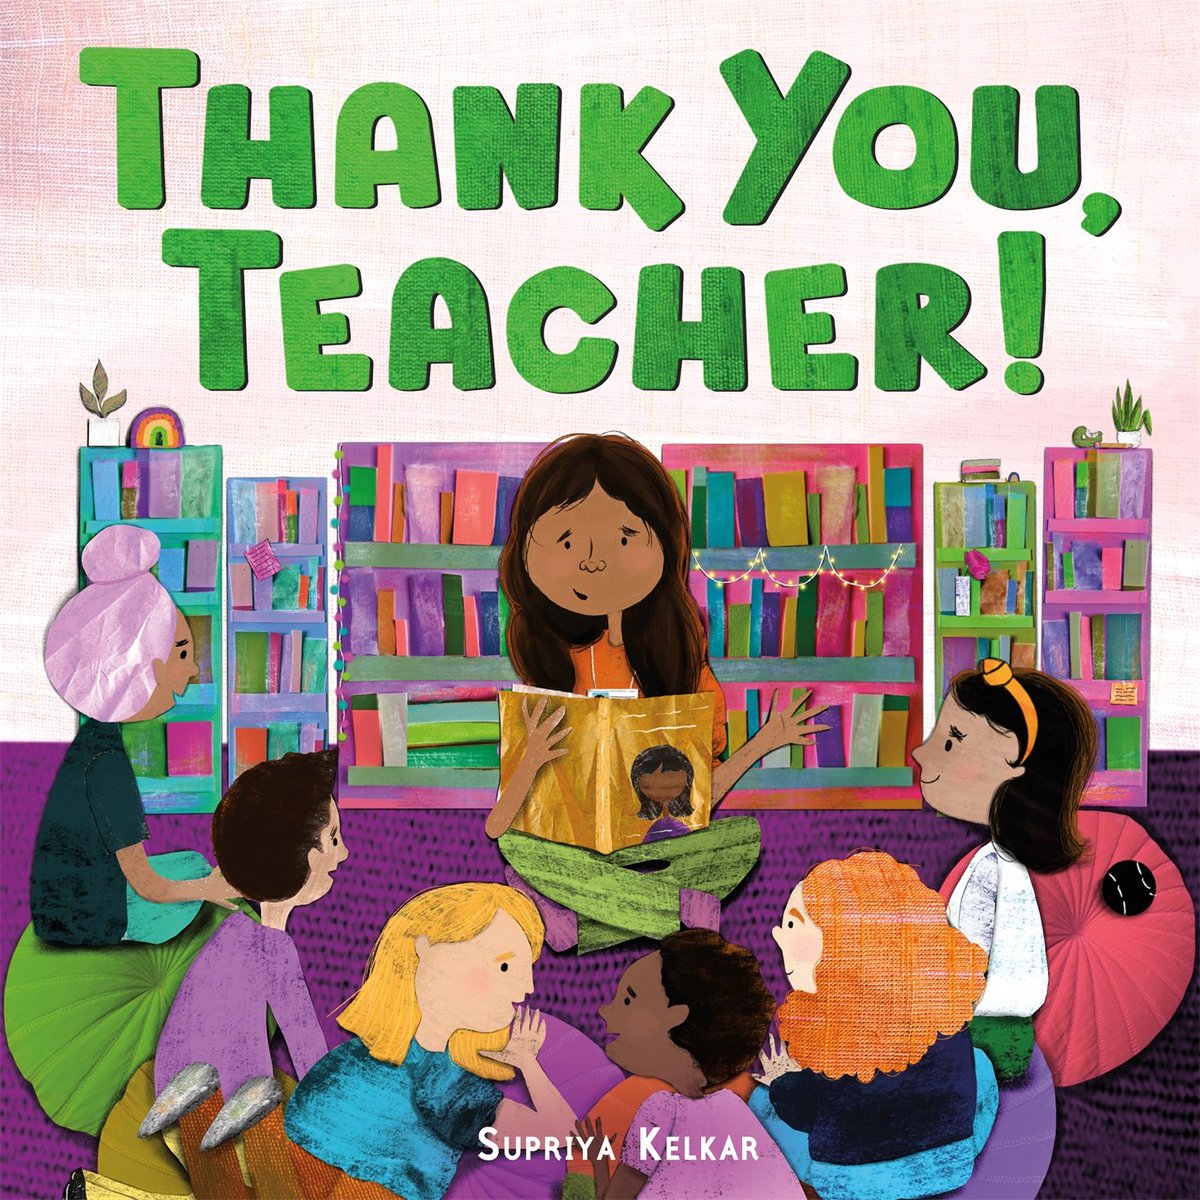 In case you missed it on IG last week, here's the cover for my new picture book, THANK YOU, TEACHER! Out 2/25/25 and available for preorder today! us.macmillan.com/books/97803743…